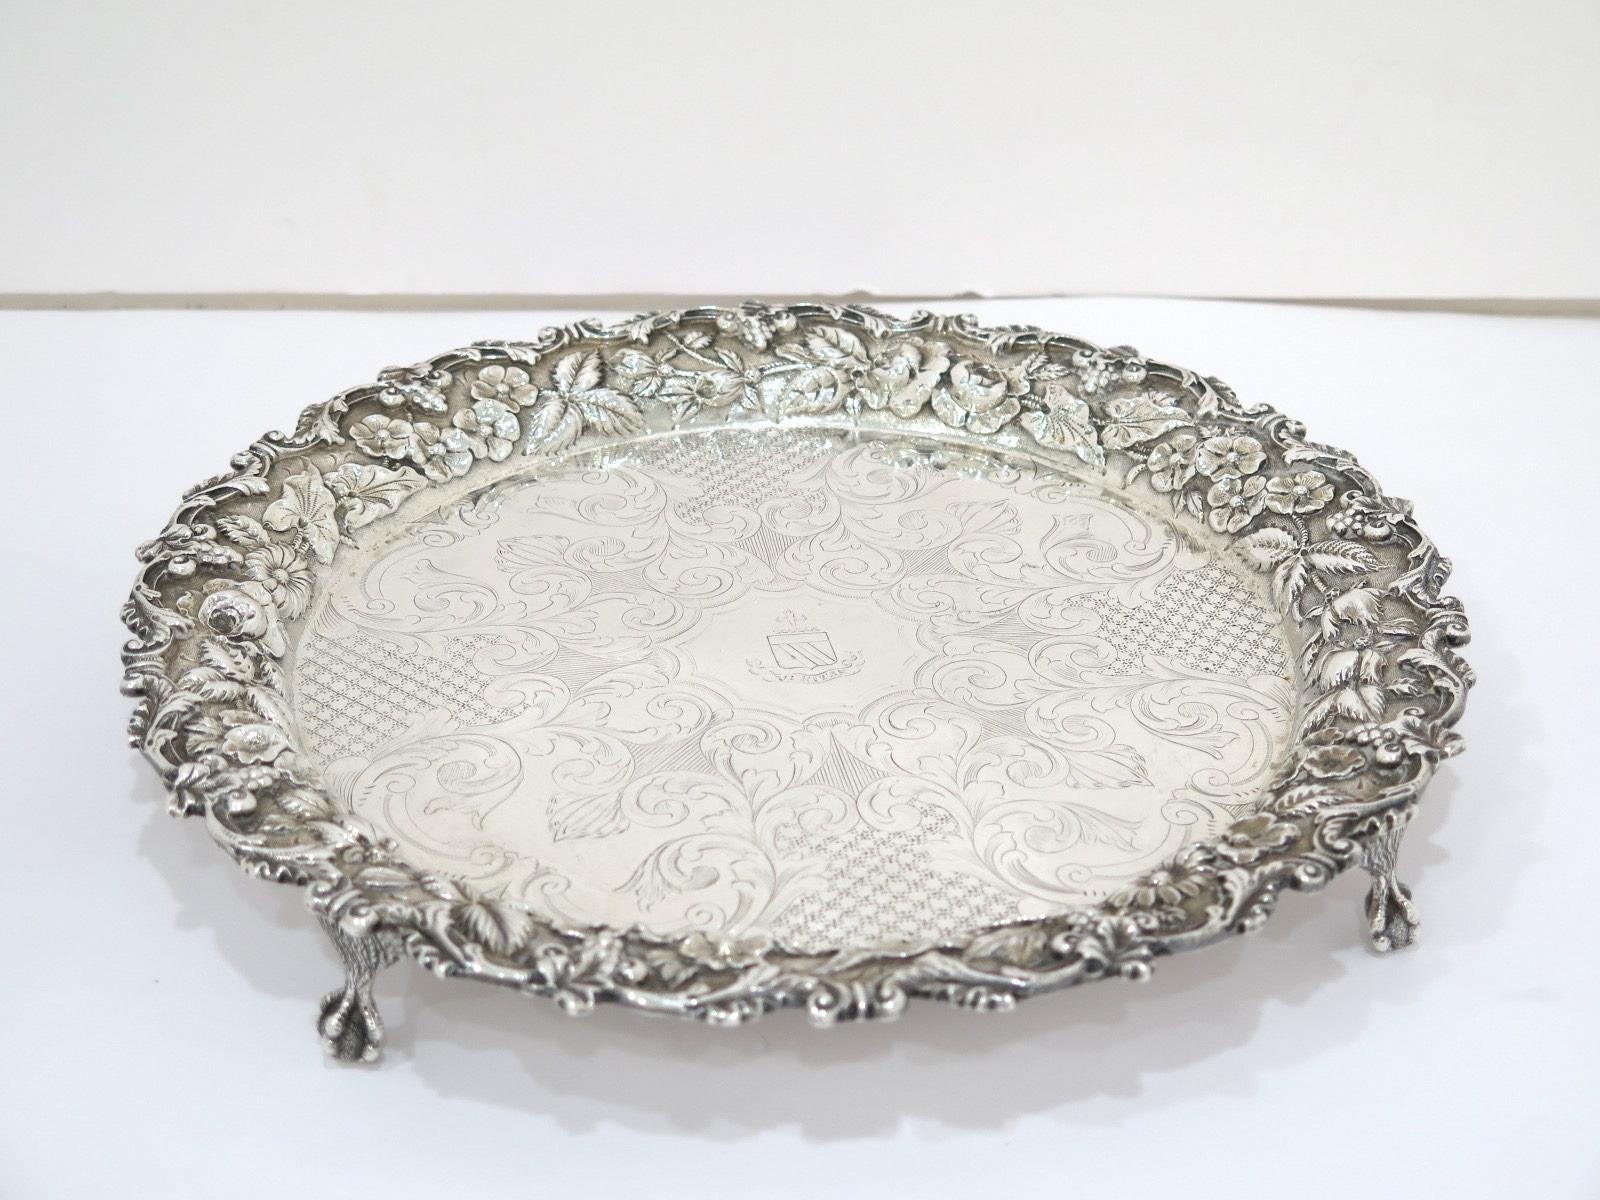 Repoussé 11 in - Sterling Silver S. Kirk & Son Antique Floral Repousse Footed Round Tray